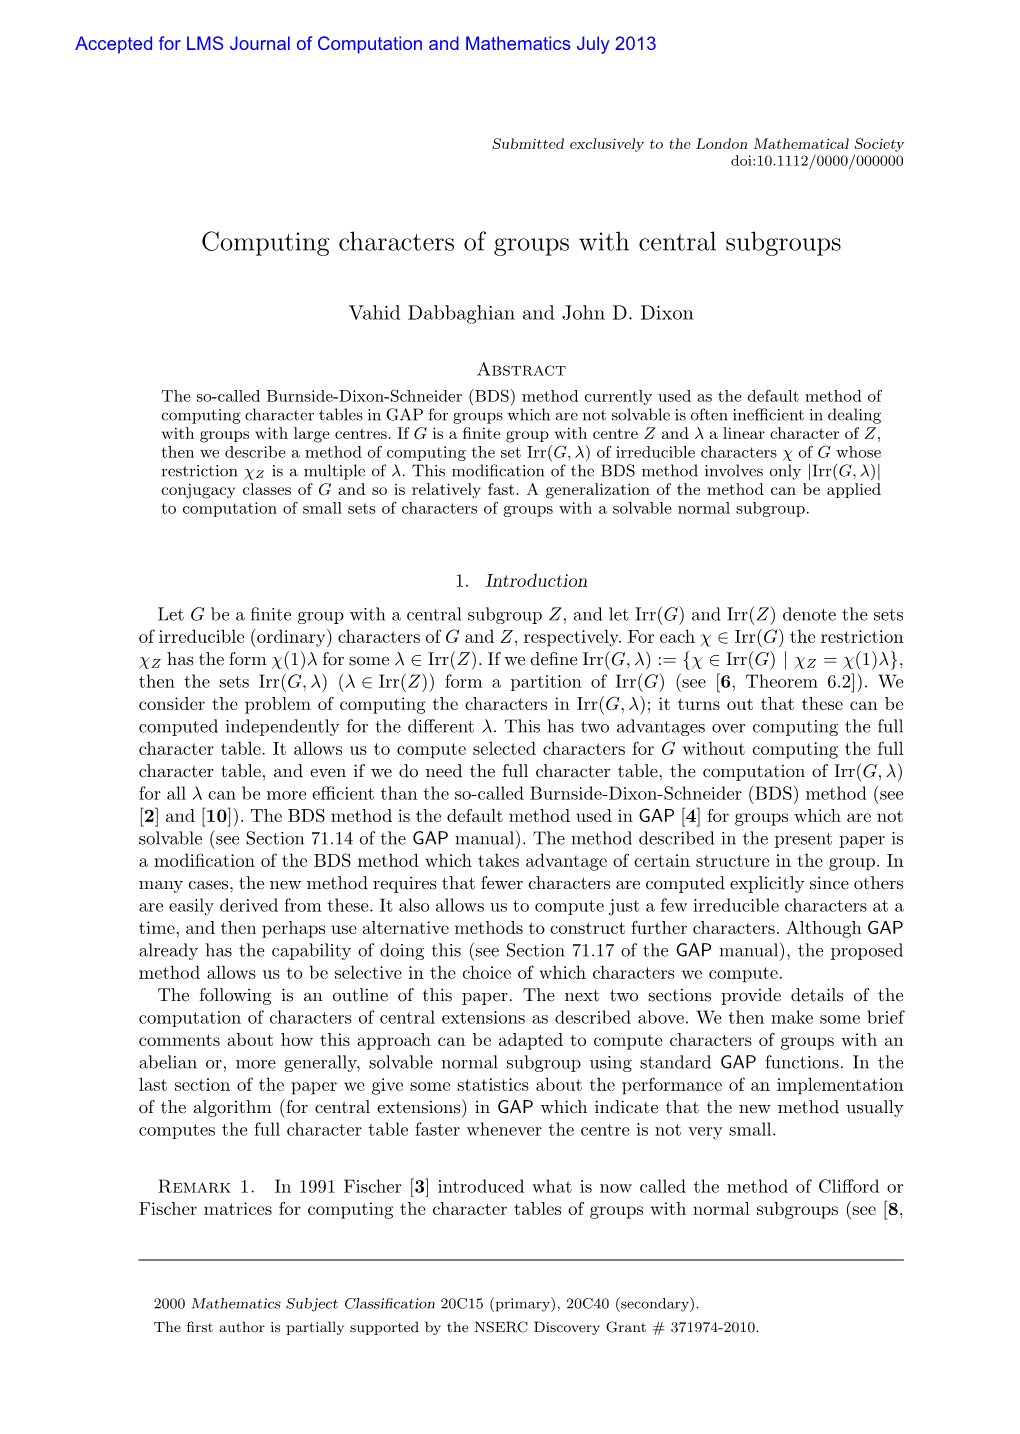 Computing Characters of Groups with Central Subgroups